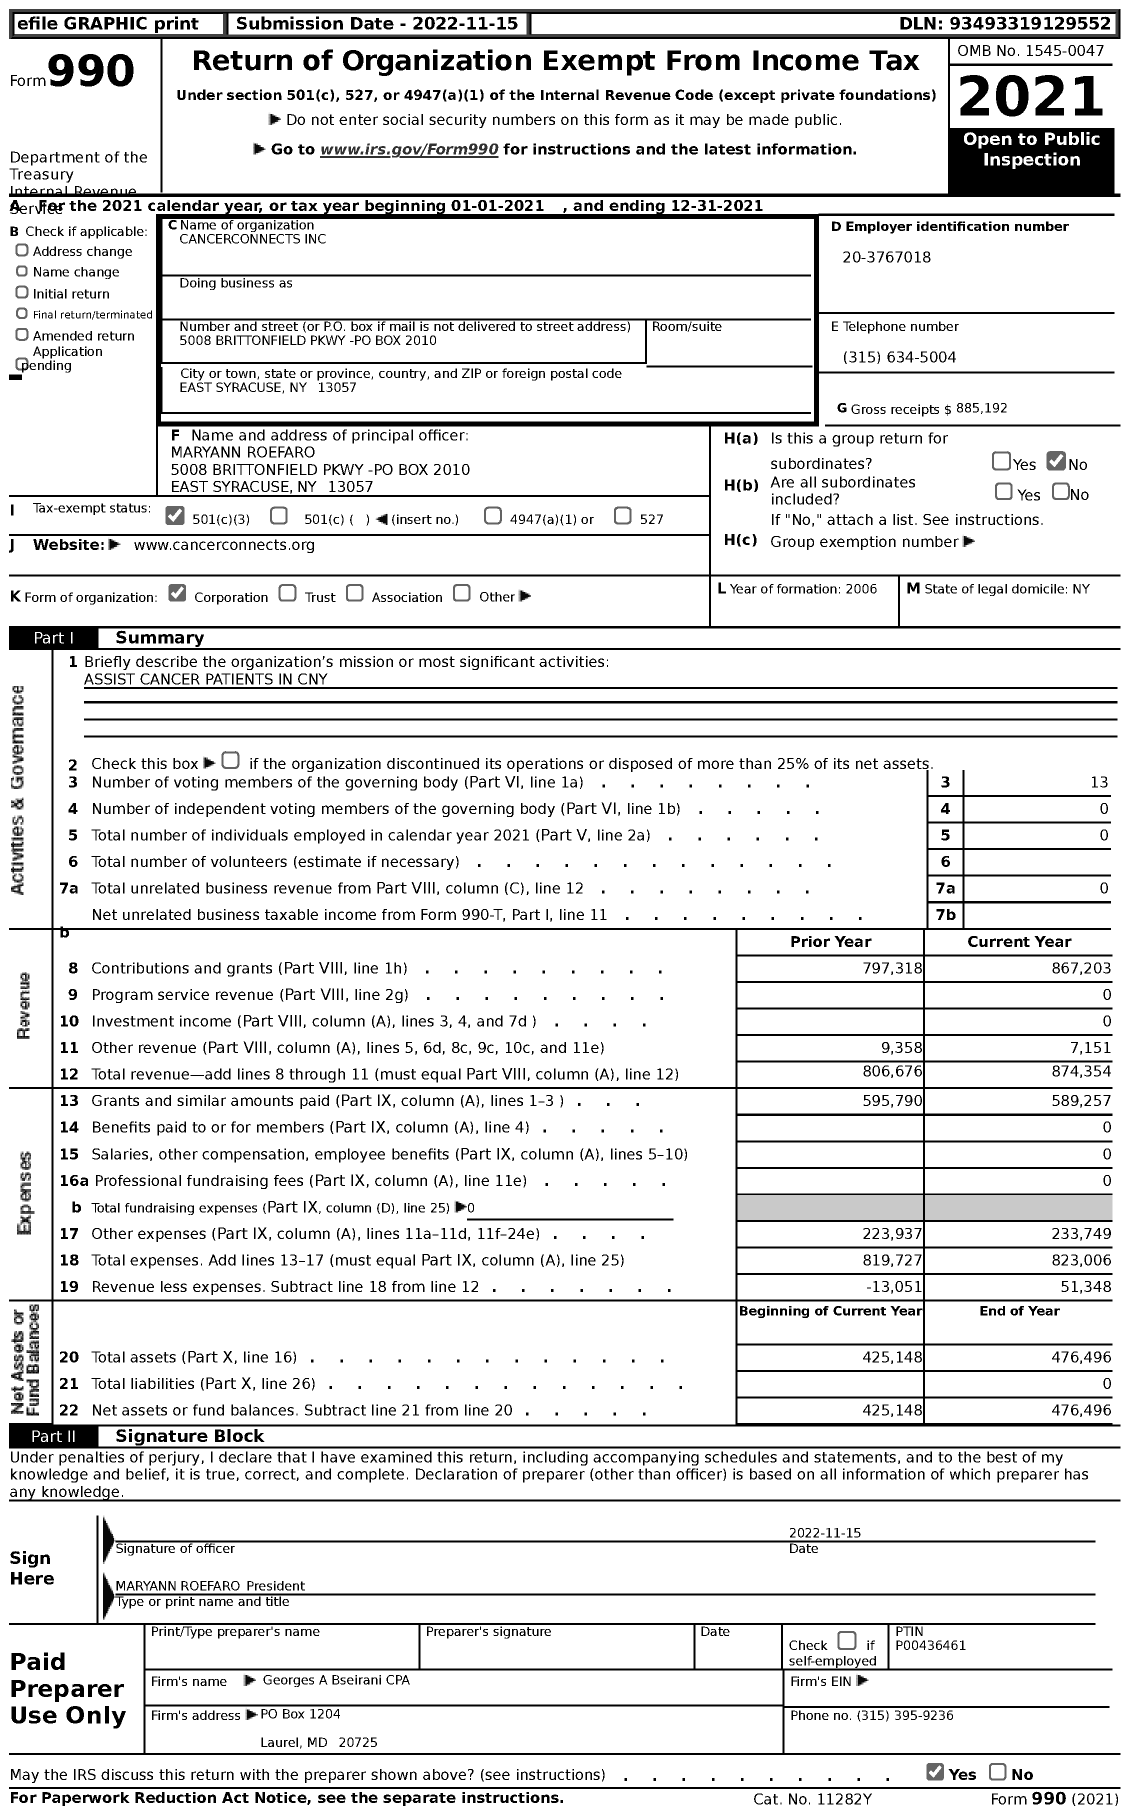 Image of first page of 2021 Form 990 for Cancerconnects